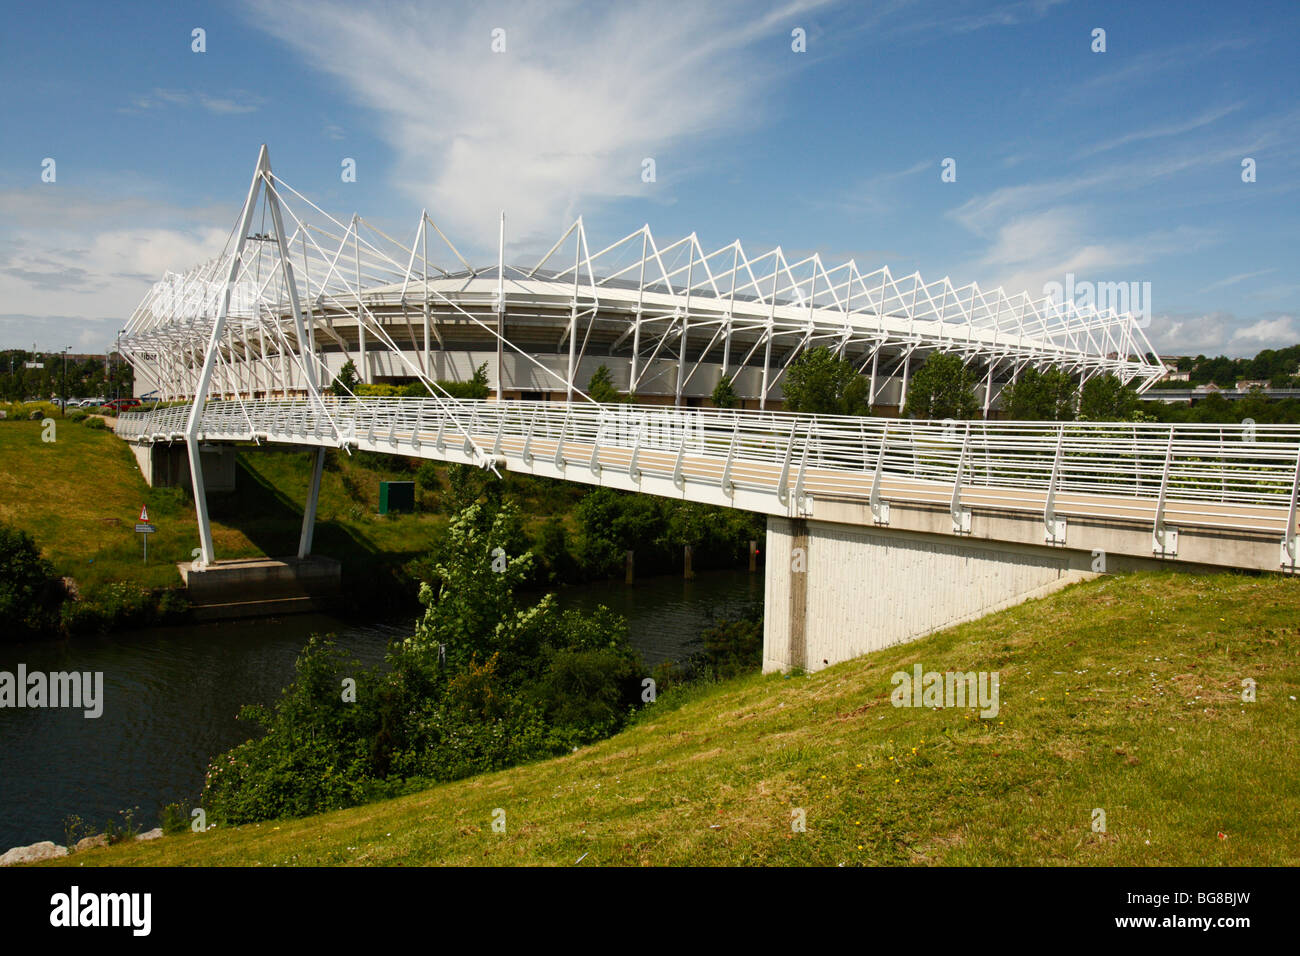 The Liberty Stadium, home of Swansea City F.C. and the Ospreys rugby team, Swansea, West Glamorgan, South Wales, U.K., in summer Stock Photo